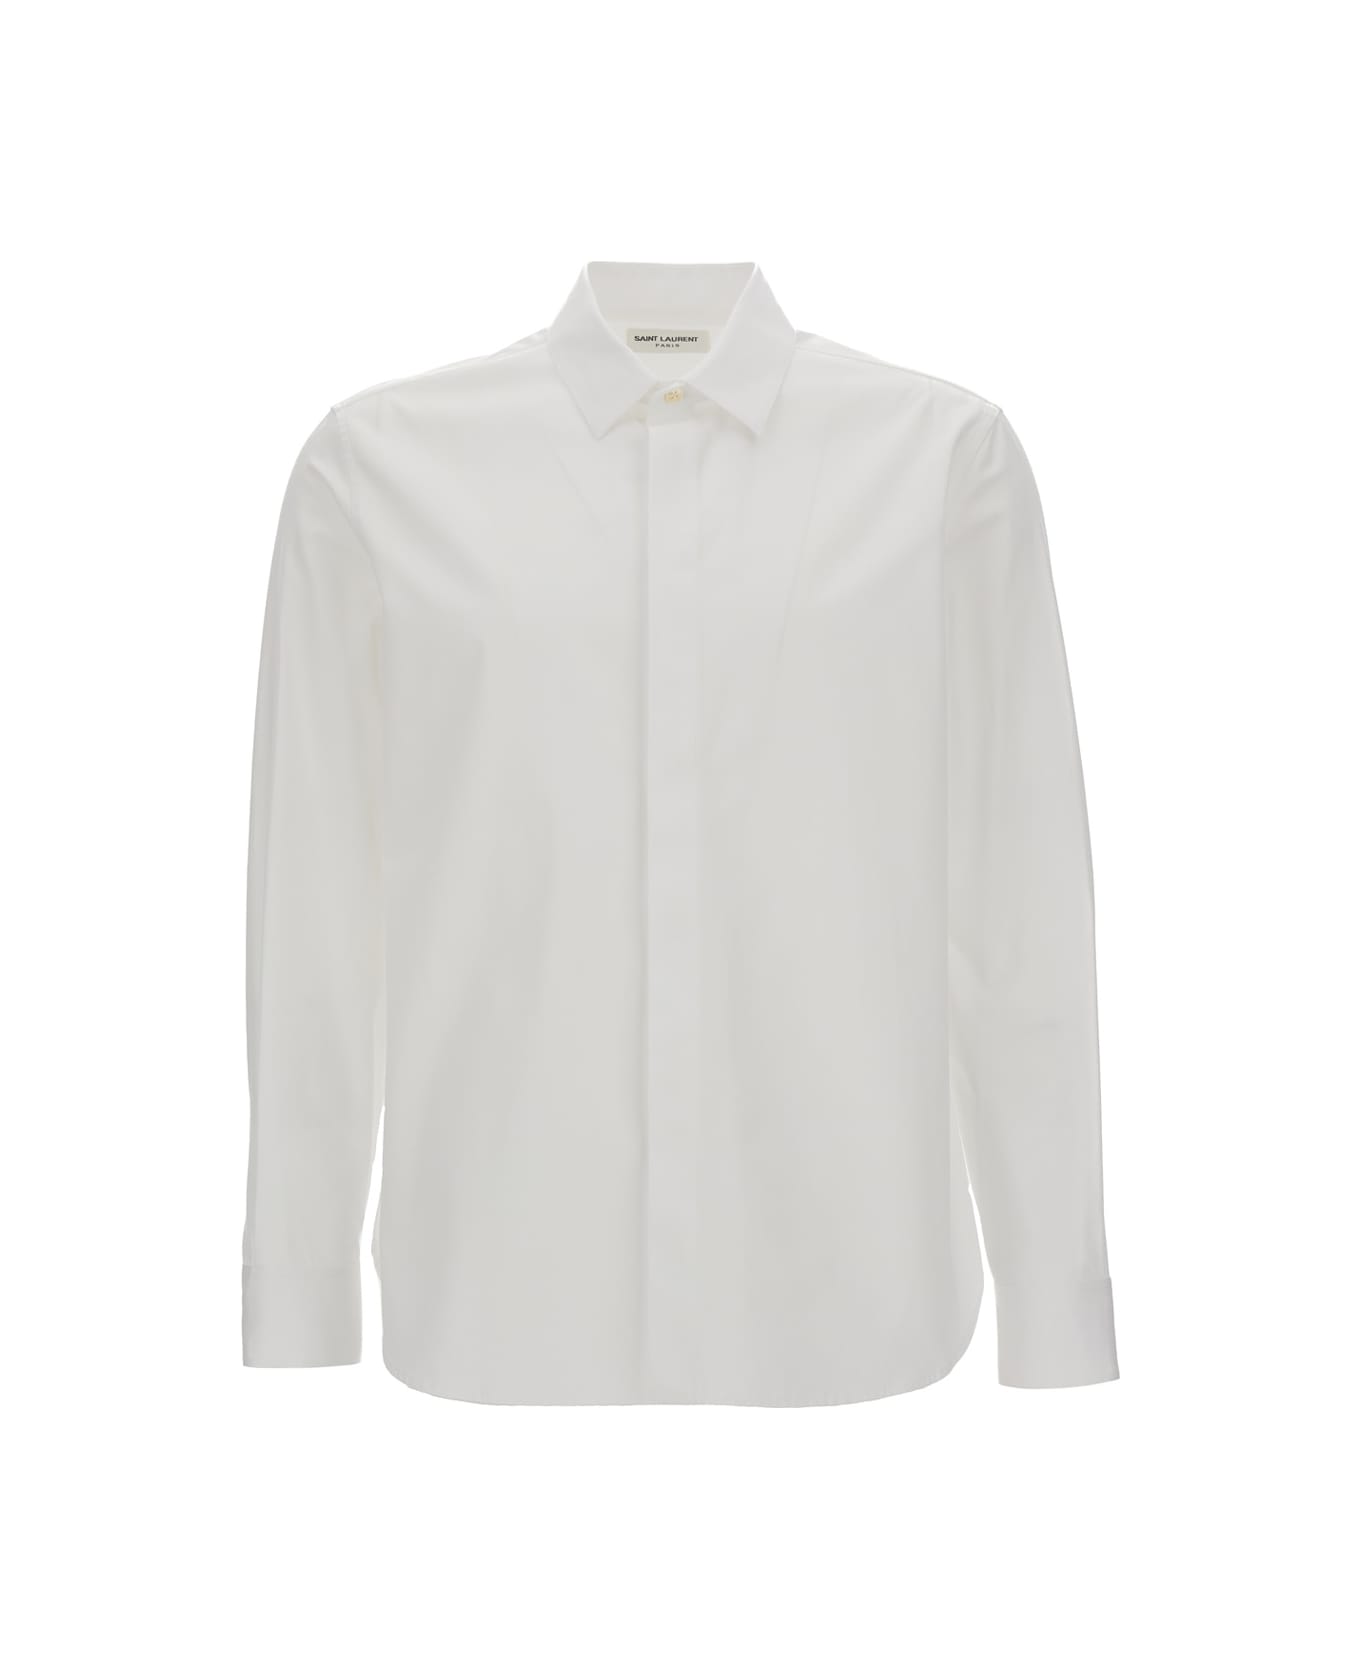 Saint Laurent White Pointed Collar Long Sleeve Shirt In Cotton Man - White